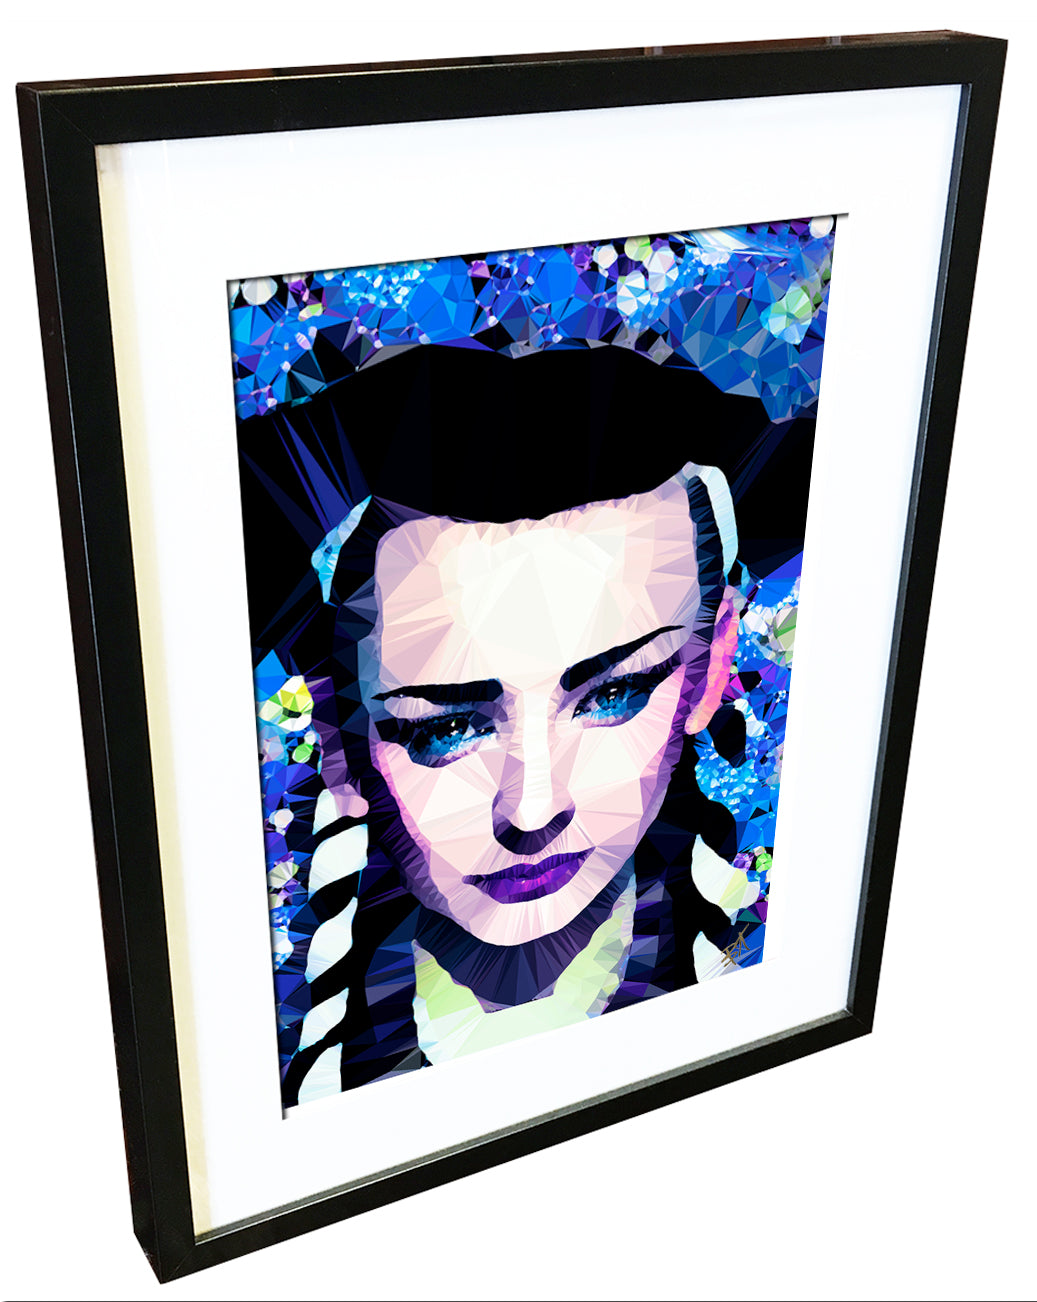 Boy George #3 by Baiba Auria - signed art print - Egoiste Gallery - Art Gallery in Manchester City Centre